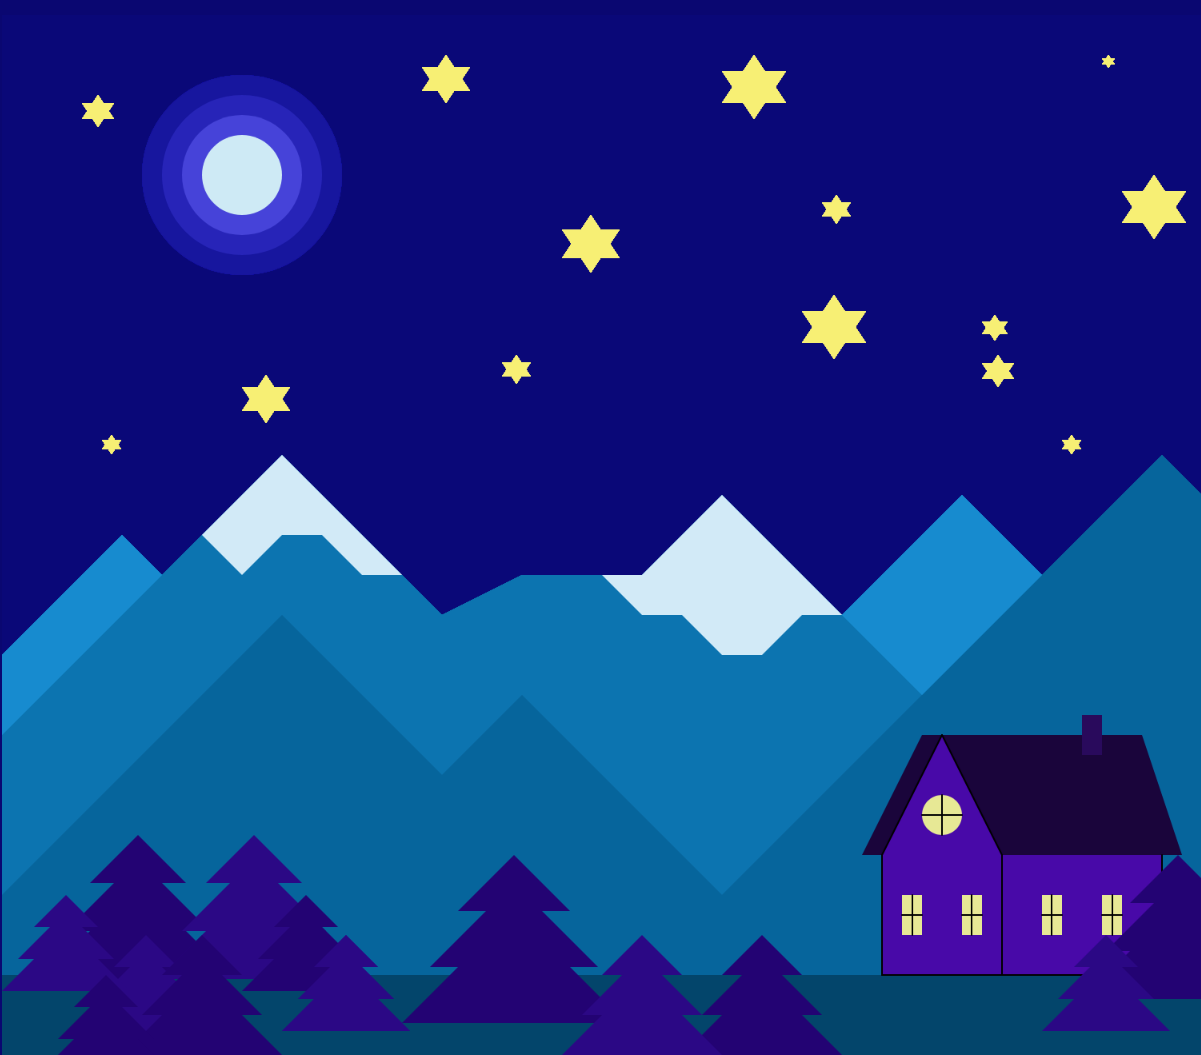 A house surrounded by trees with mountains in the background and the moon and stars above.